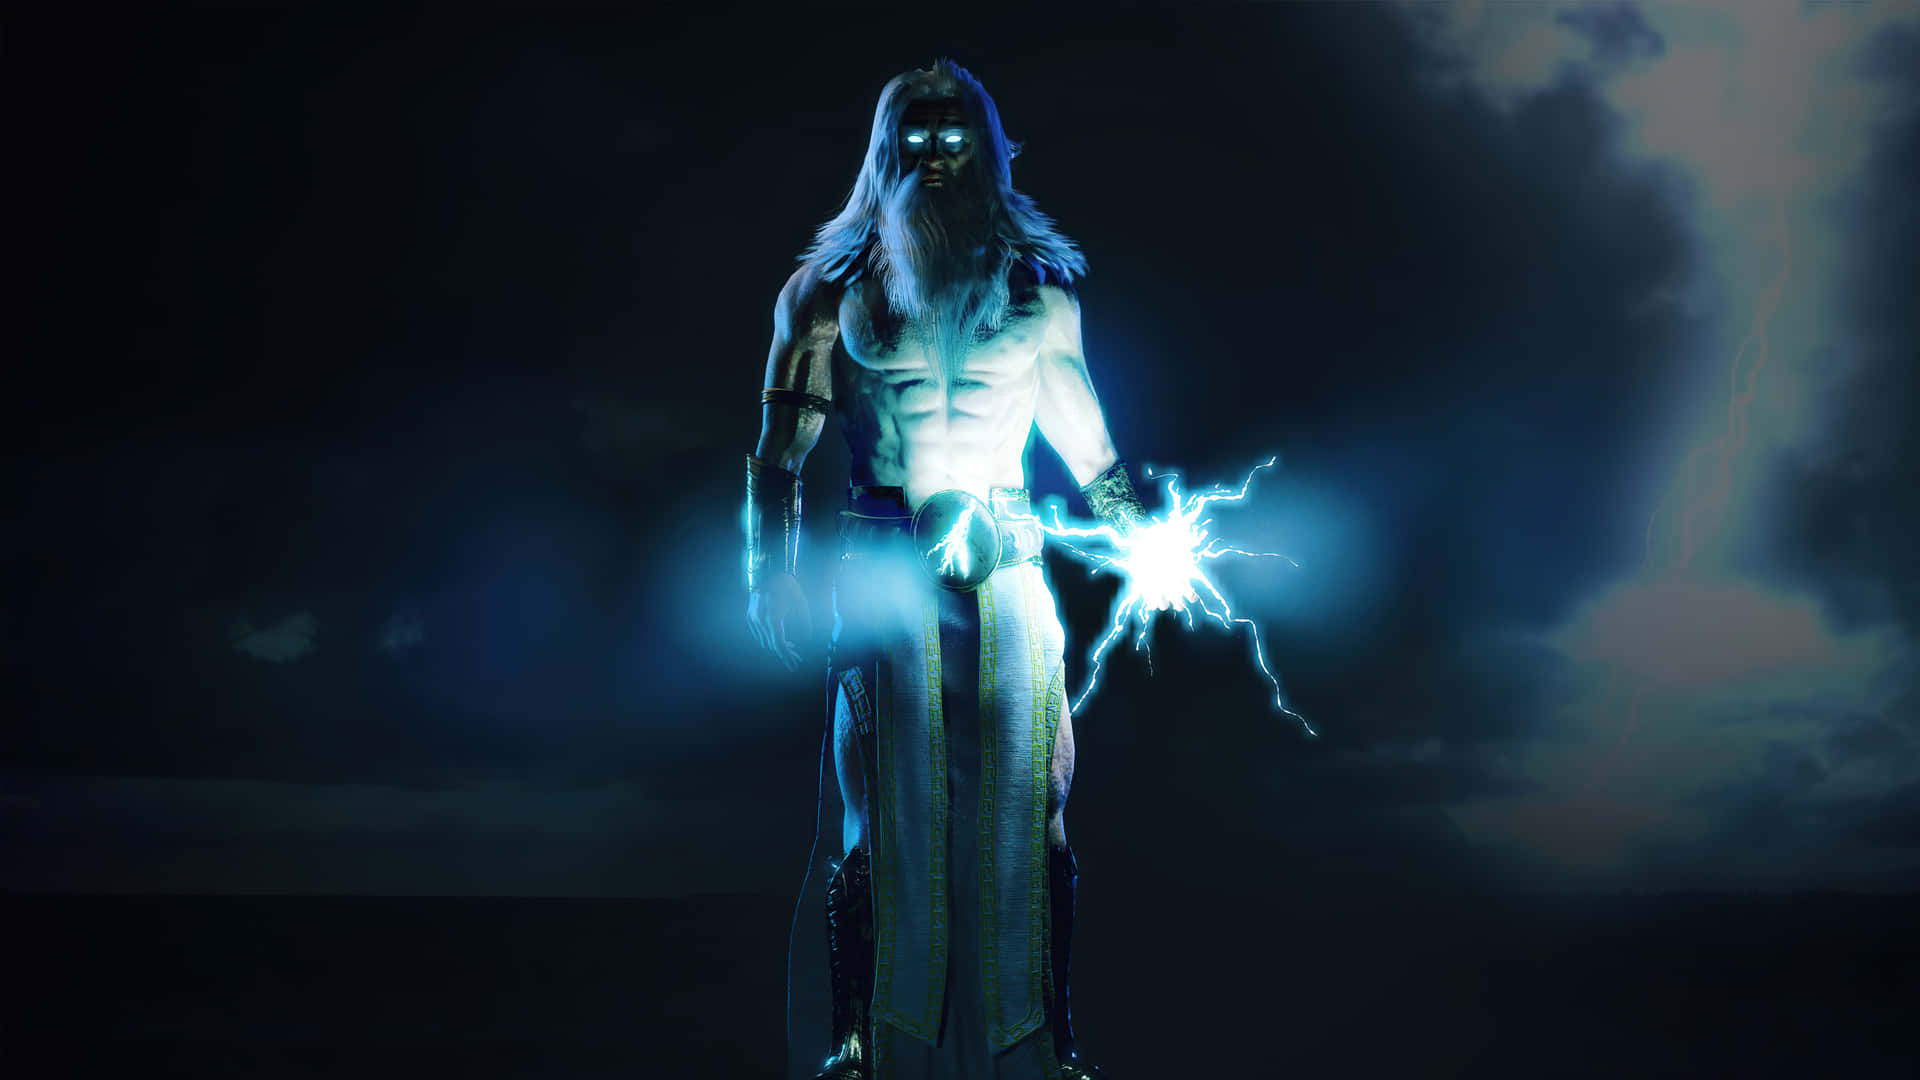 “The almighty Zeus, king of the gods” Wallpaper